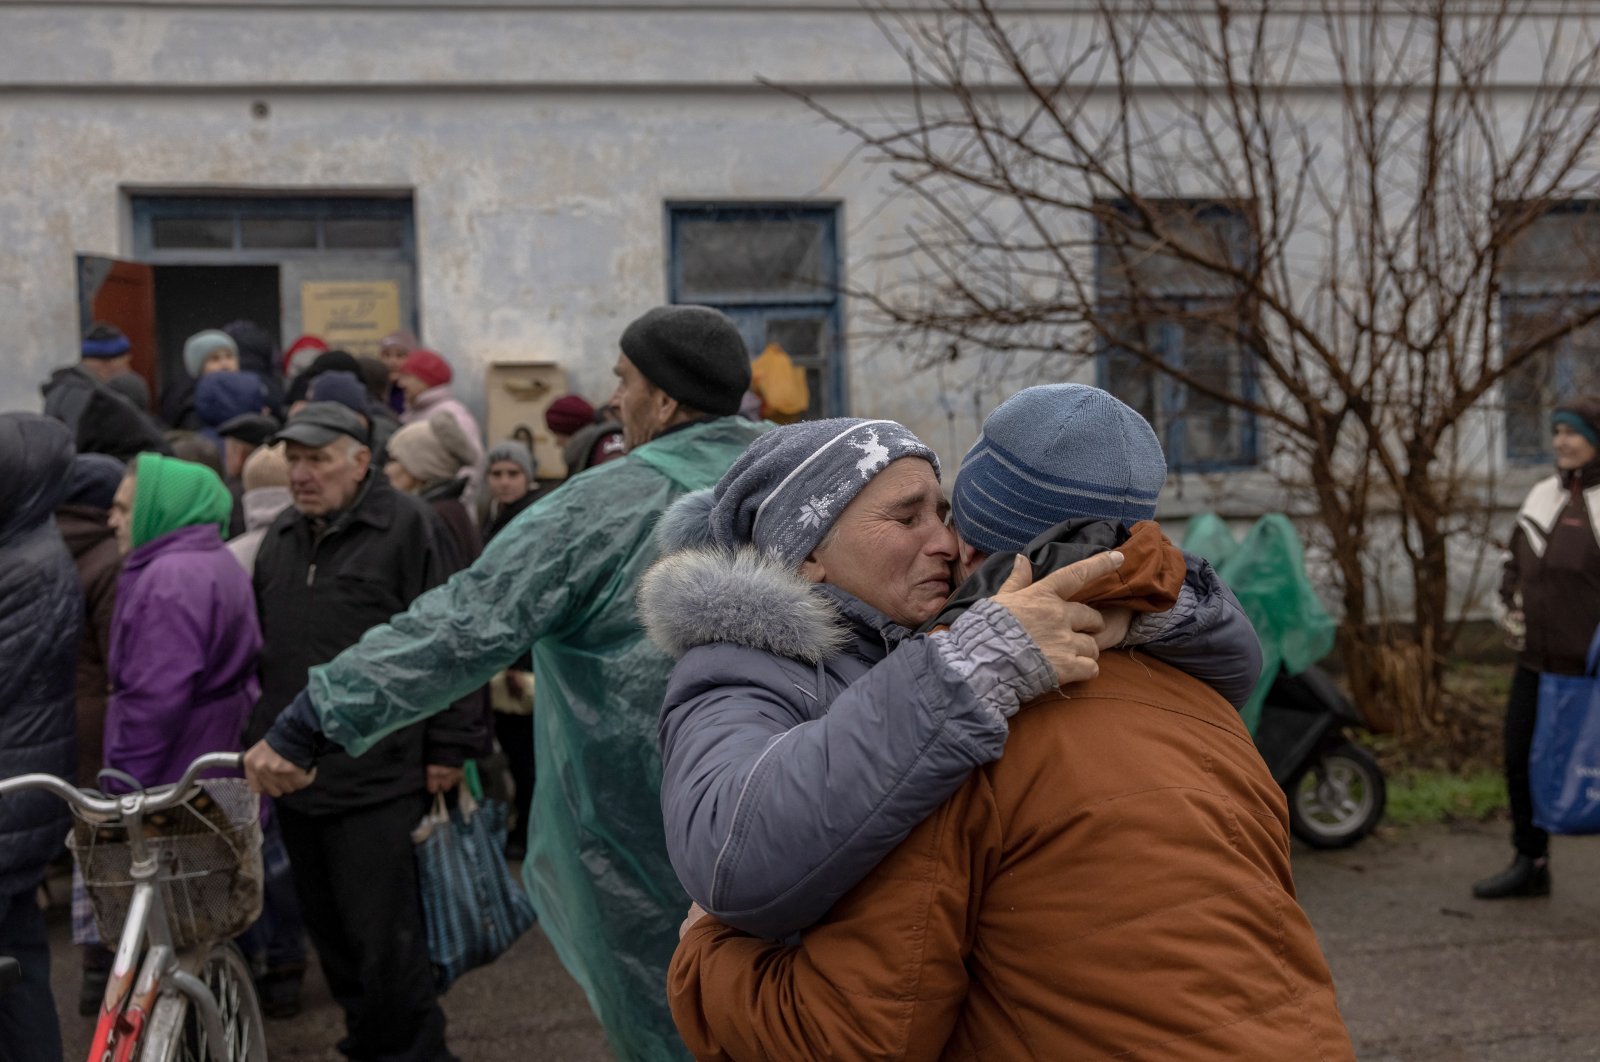 People react as they meet after a long time in Kherson, Ukraine, Nov. 26, 2022. (EPA Photo)